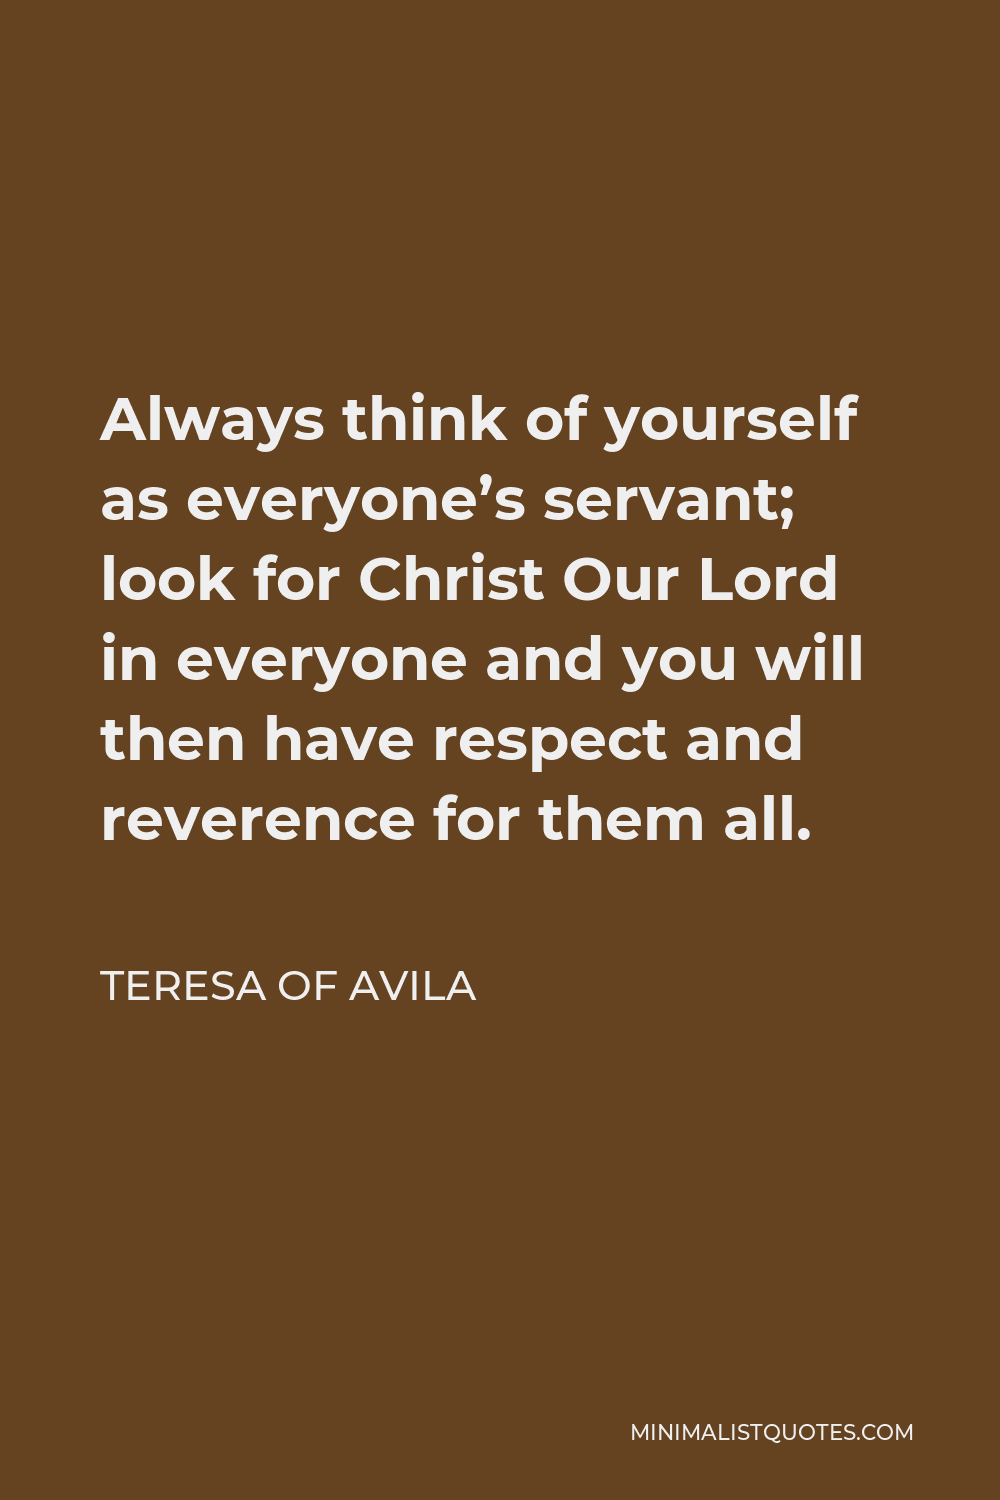 Teresa of Avila Quote - Always think of yourself as everyone’s servant; look for Christ Our Lord in everyone and you will then have respect and reverence for them all.